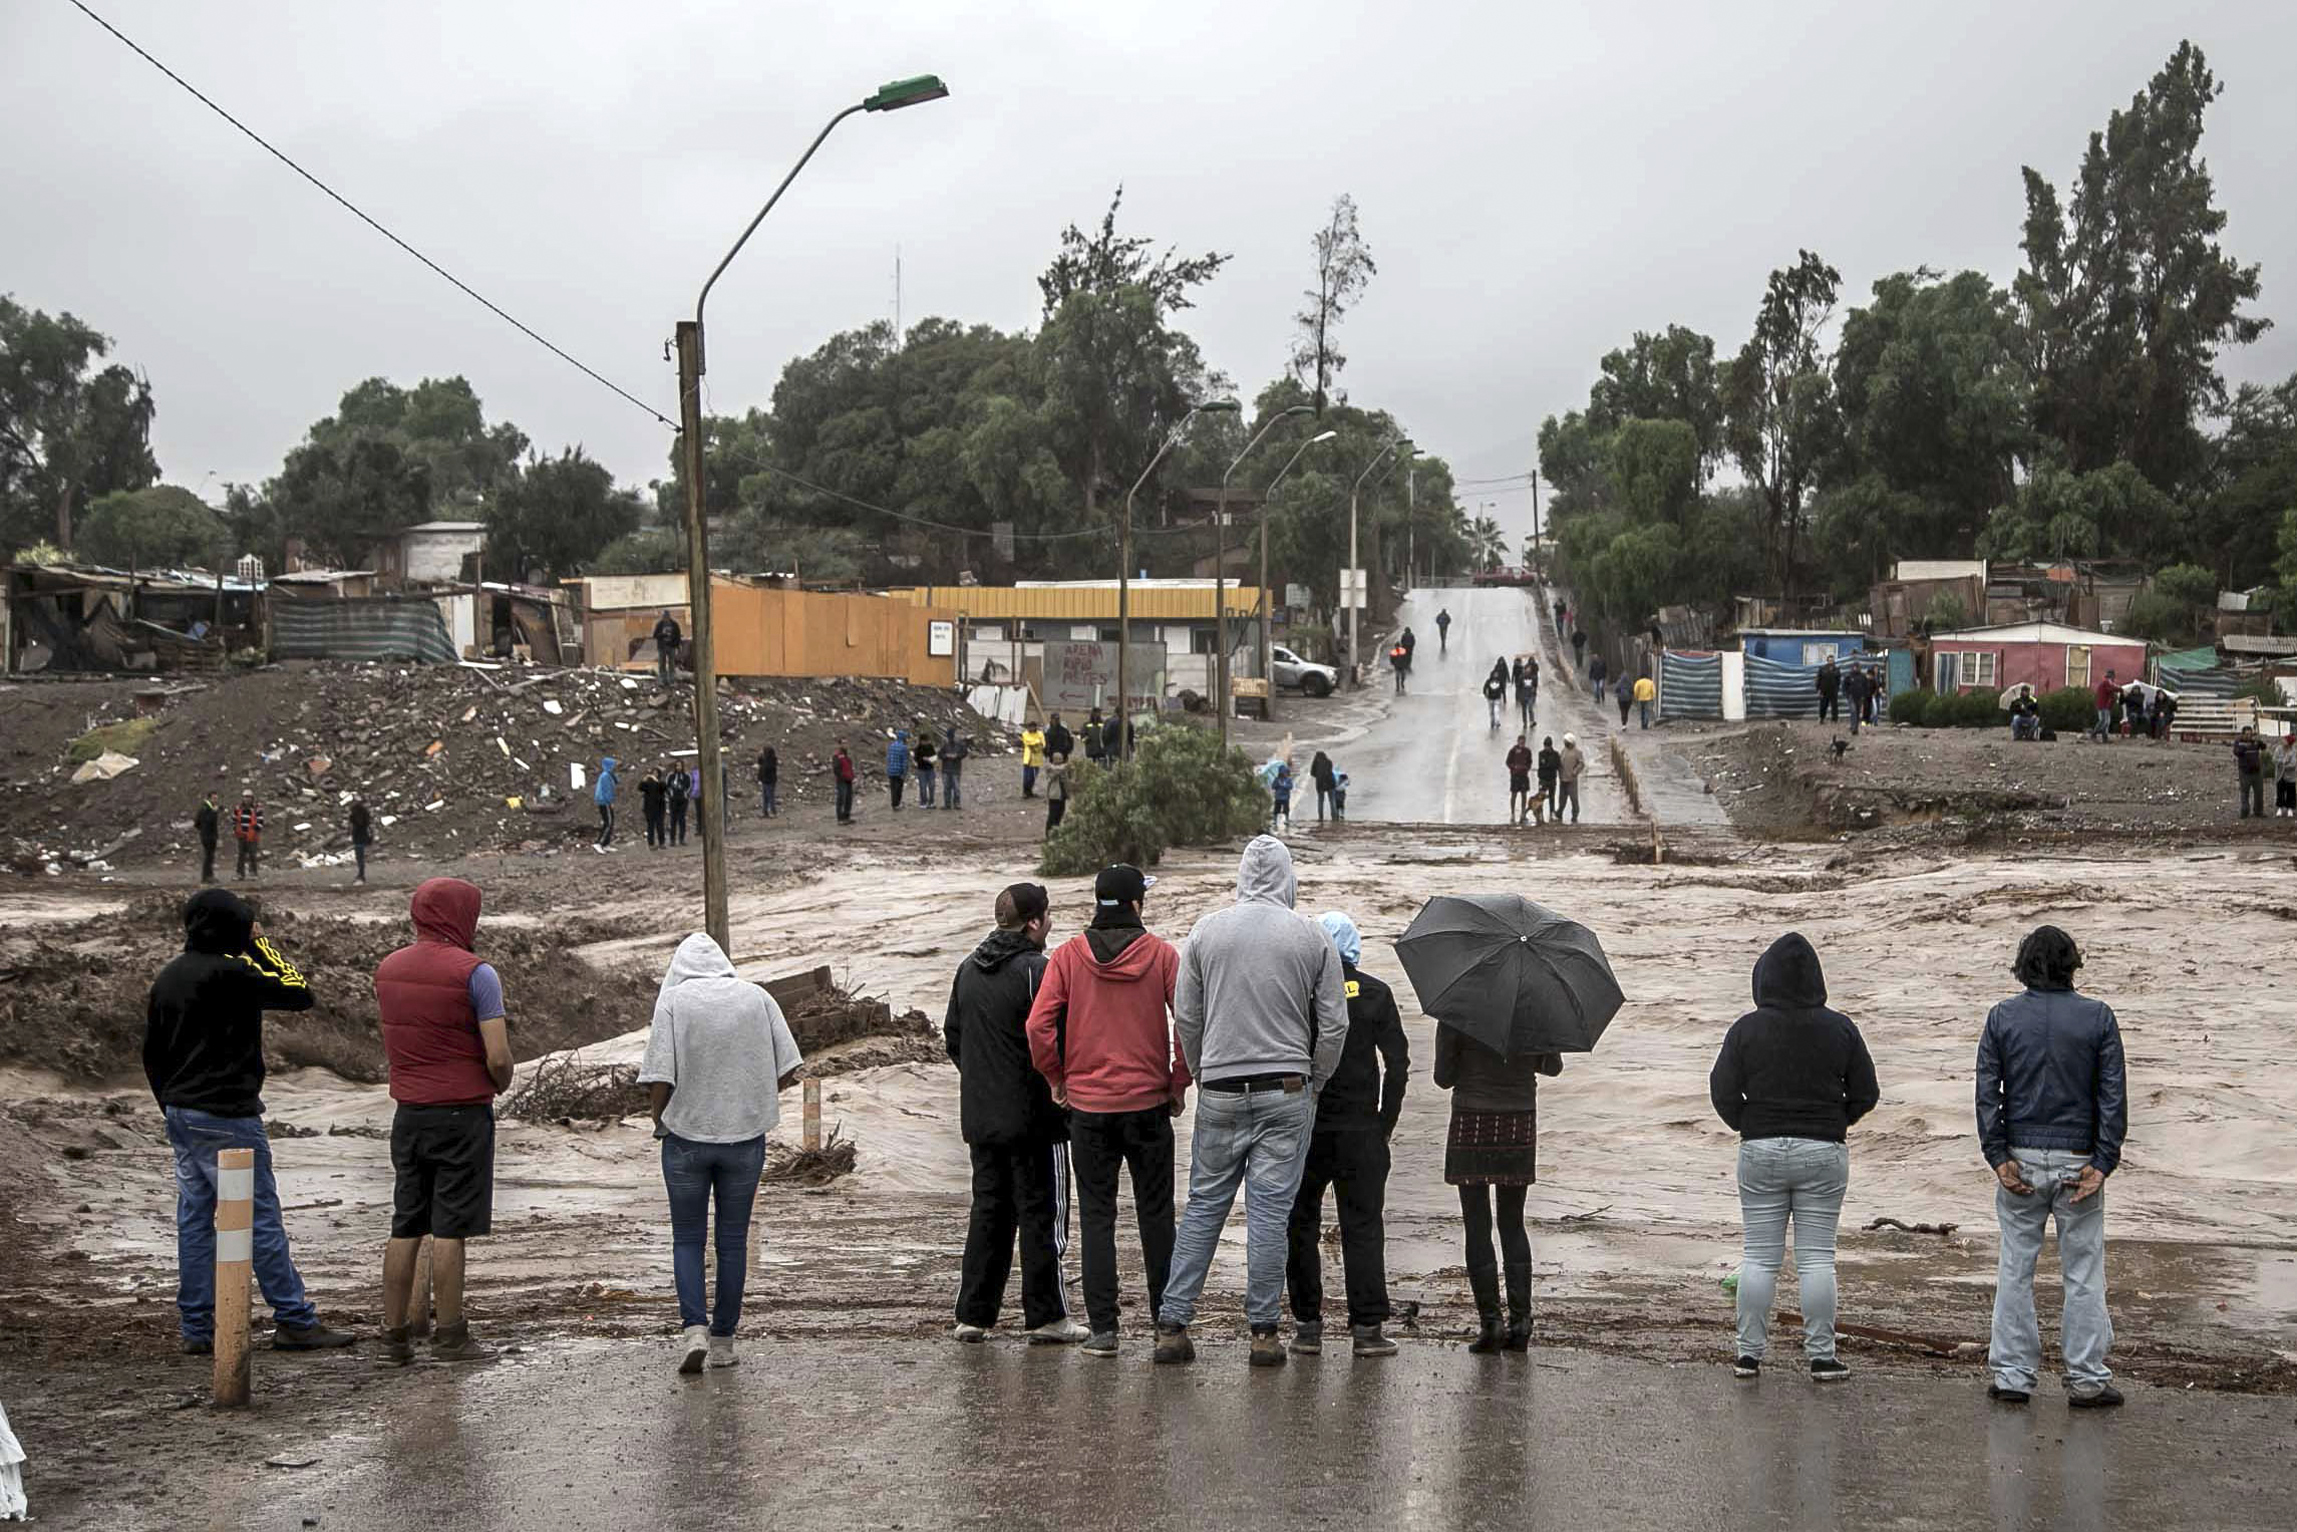 Chile declares state of emergency in floodhit desert region The